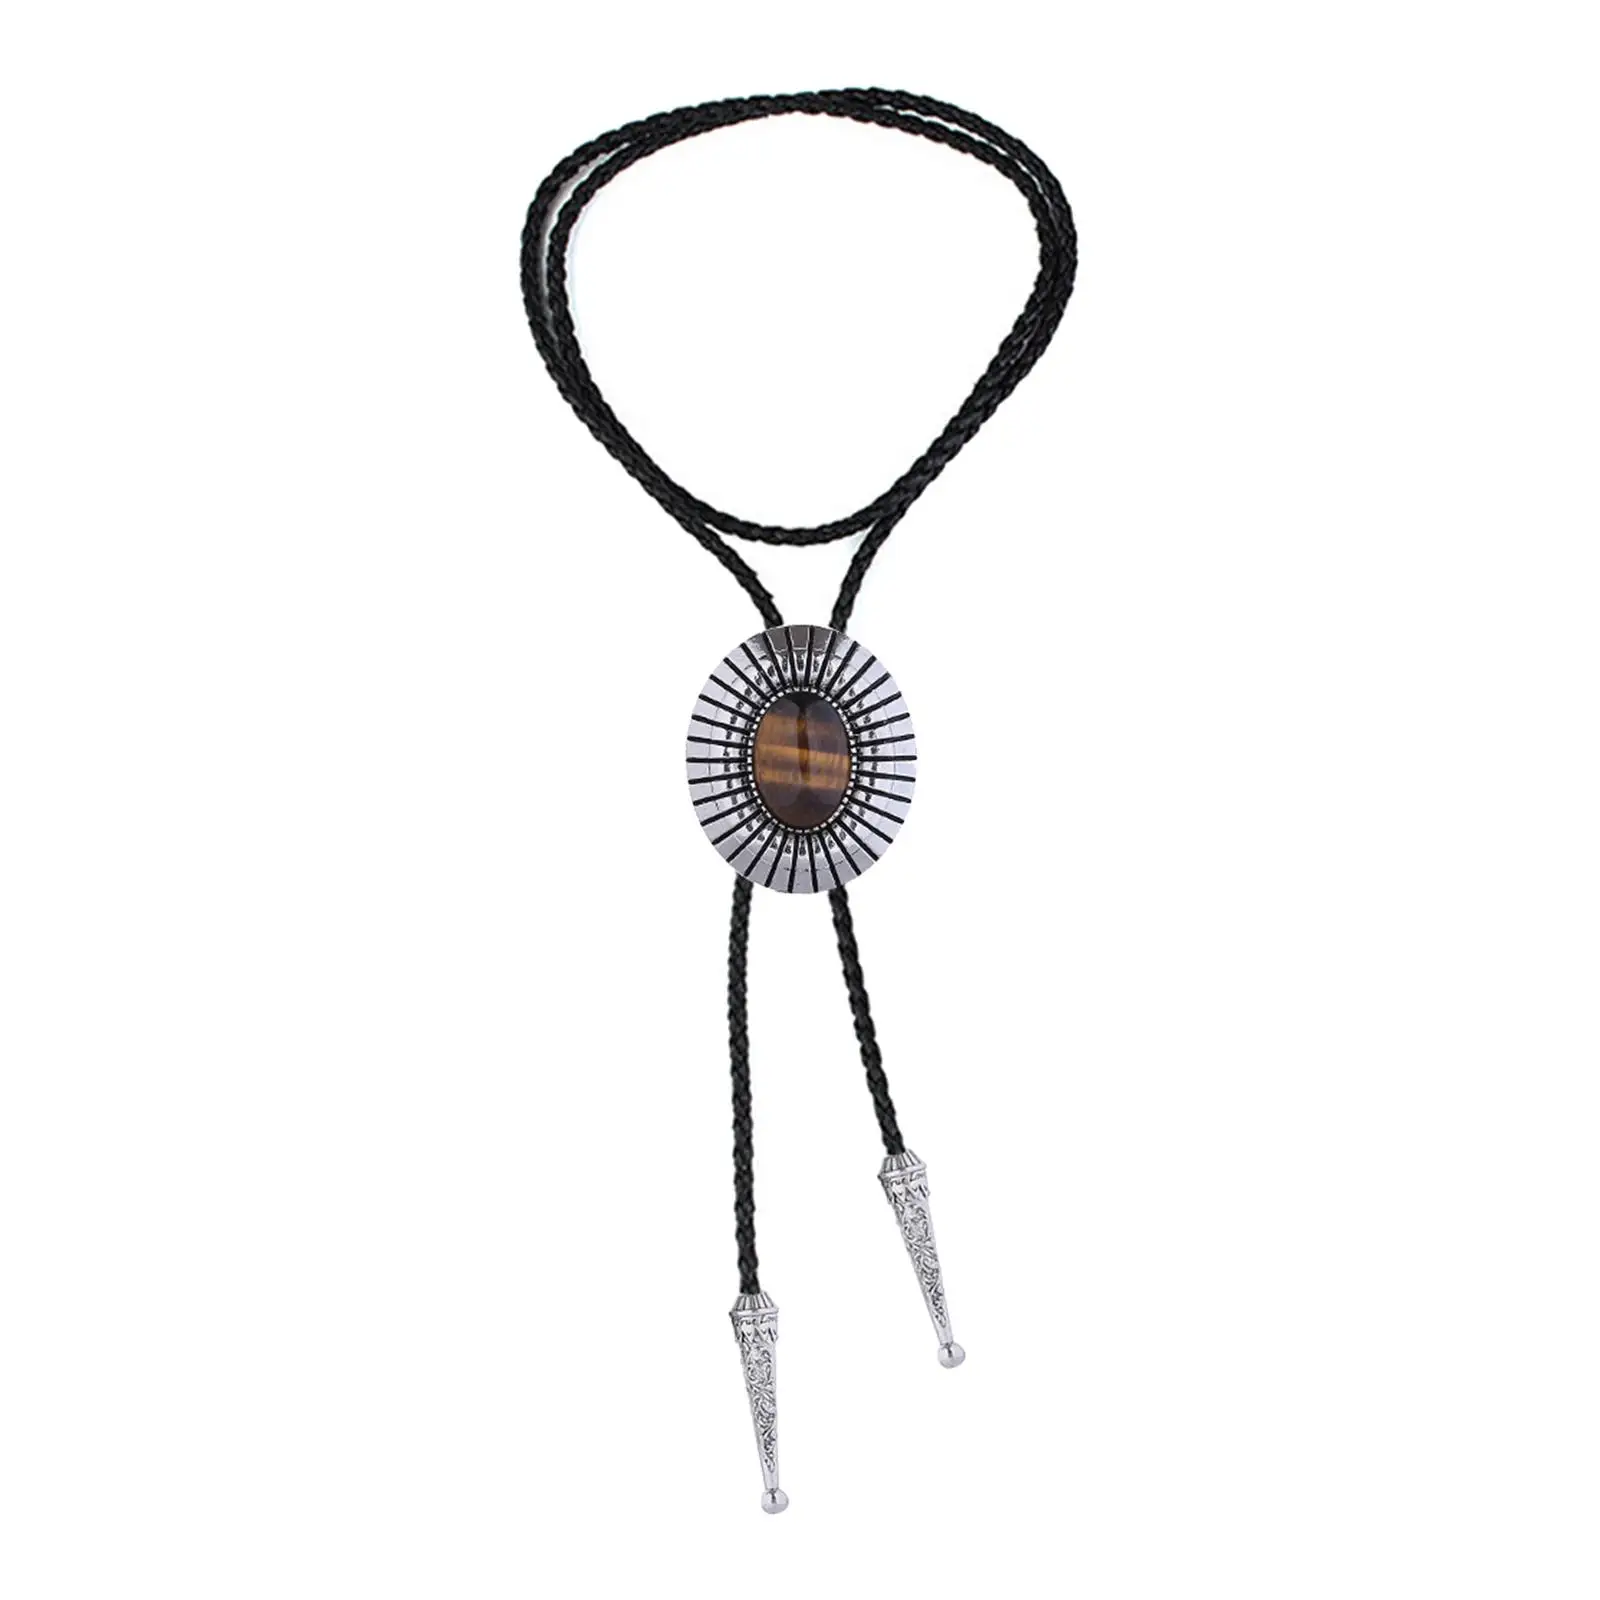 Bolo Tie Necktie Western Cowboy Adjustable Costume American Gift Vintage Oval PU Leather Necklace for Birthday Men Women